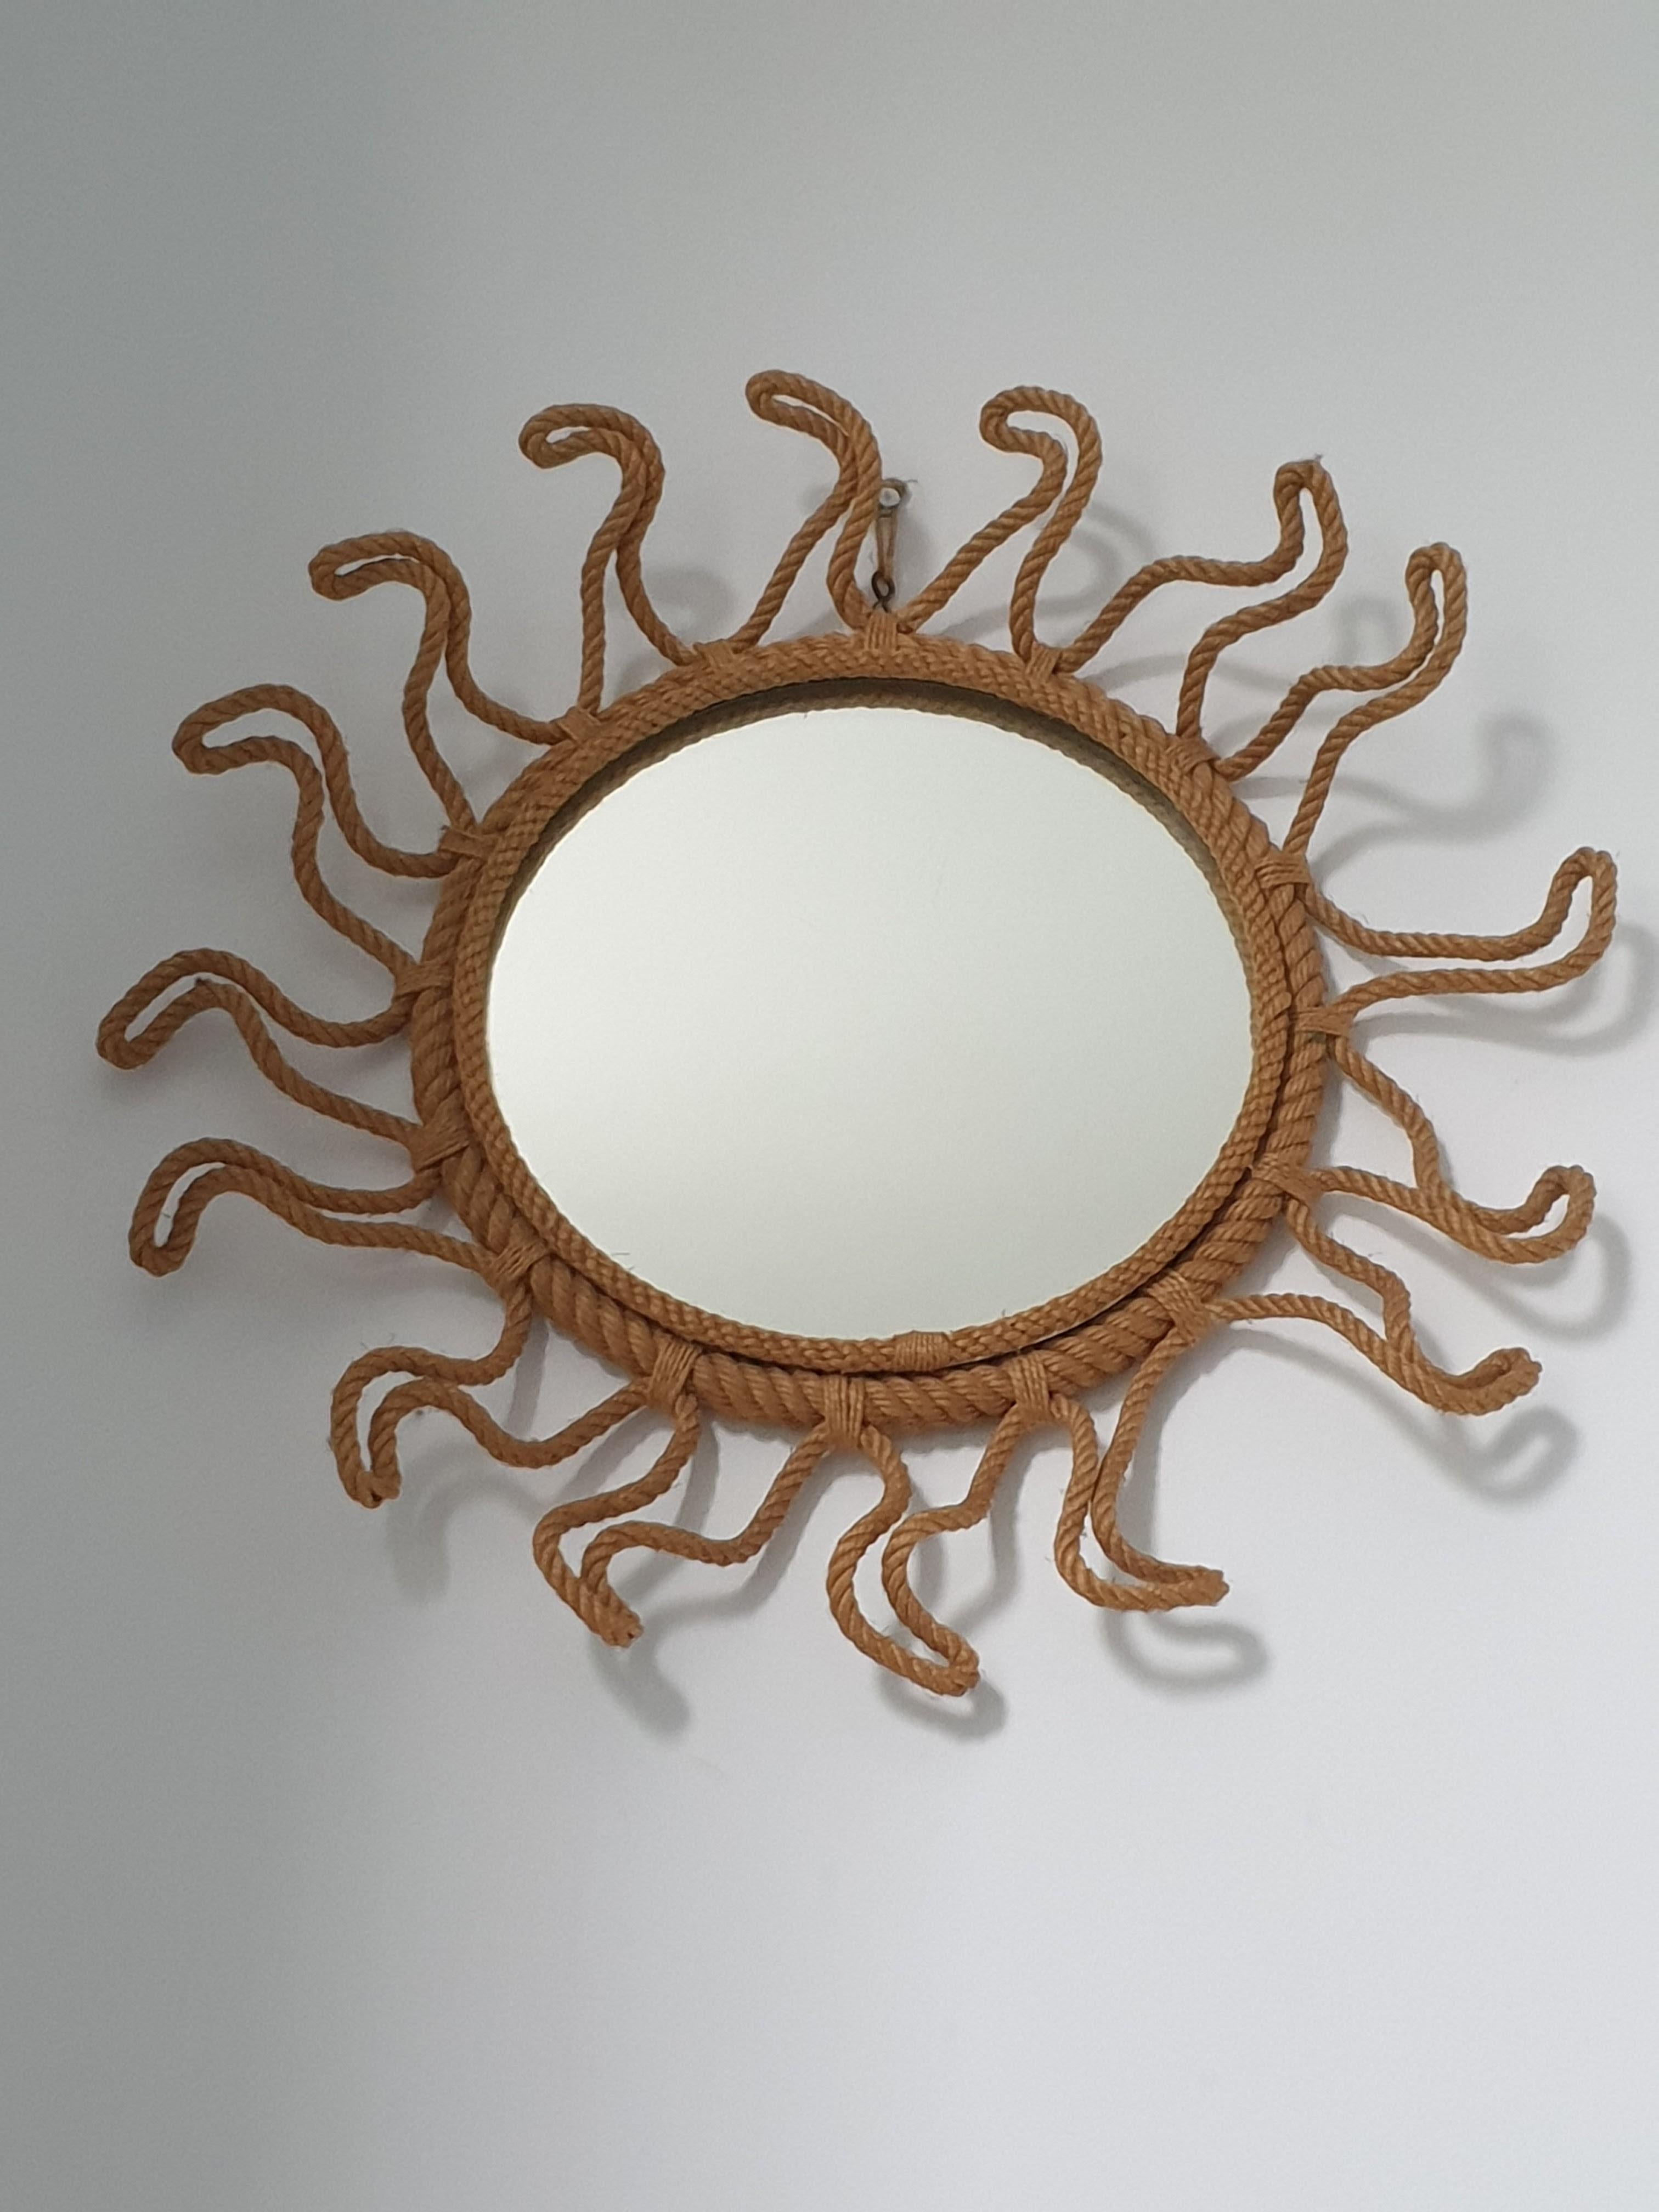 Unusual mirror made from twisted rope in the style of the classic Mirror soleil design found in the South of France. This quality mirror has a circle of rope around the plate which is then surrounded by a heavy woven rope frame, attached to which